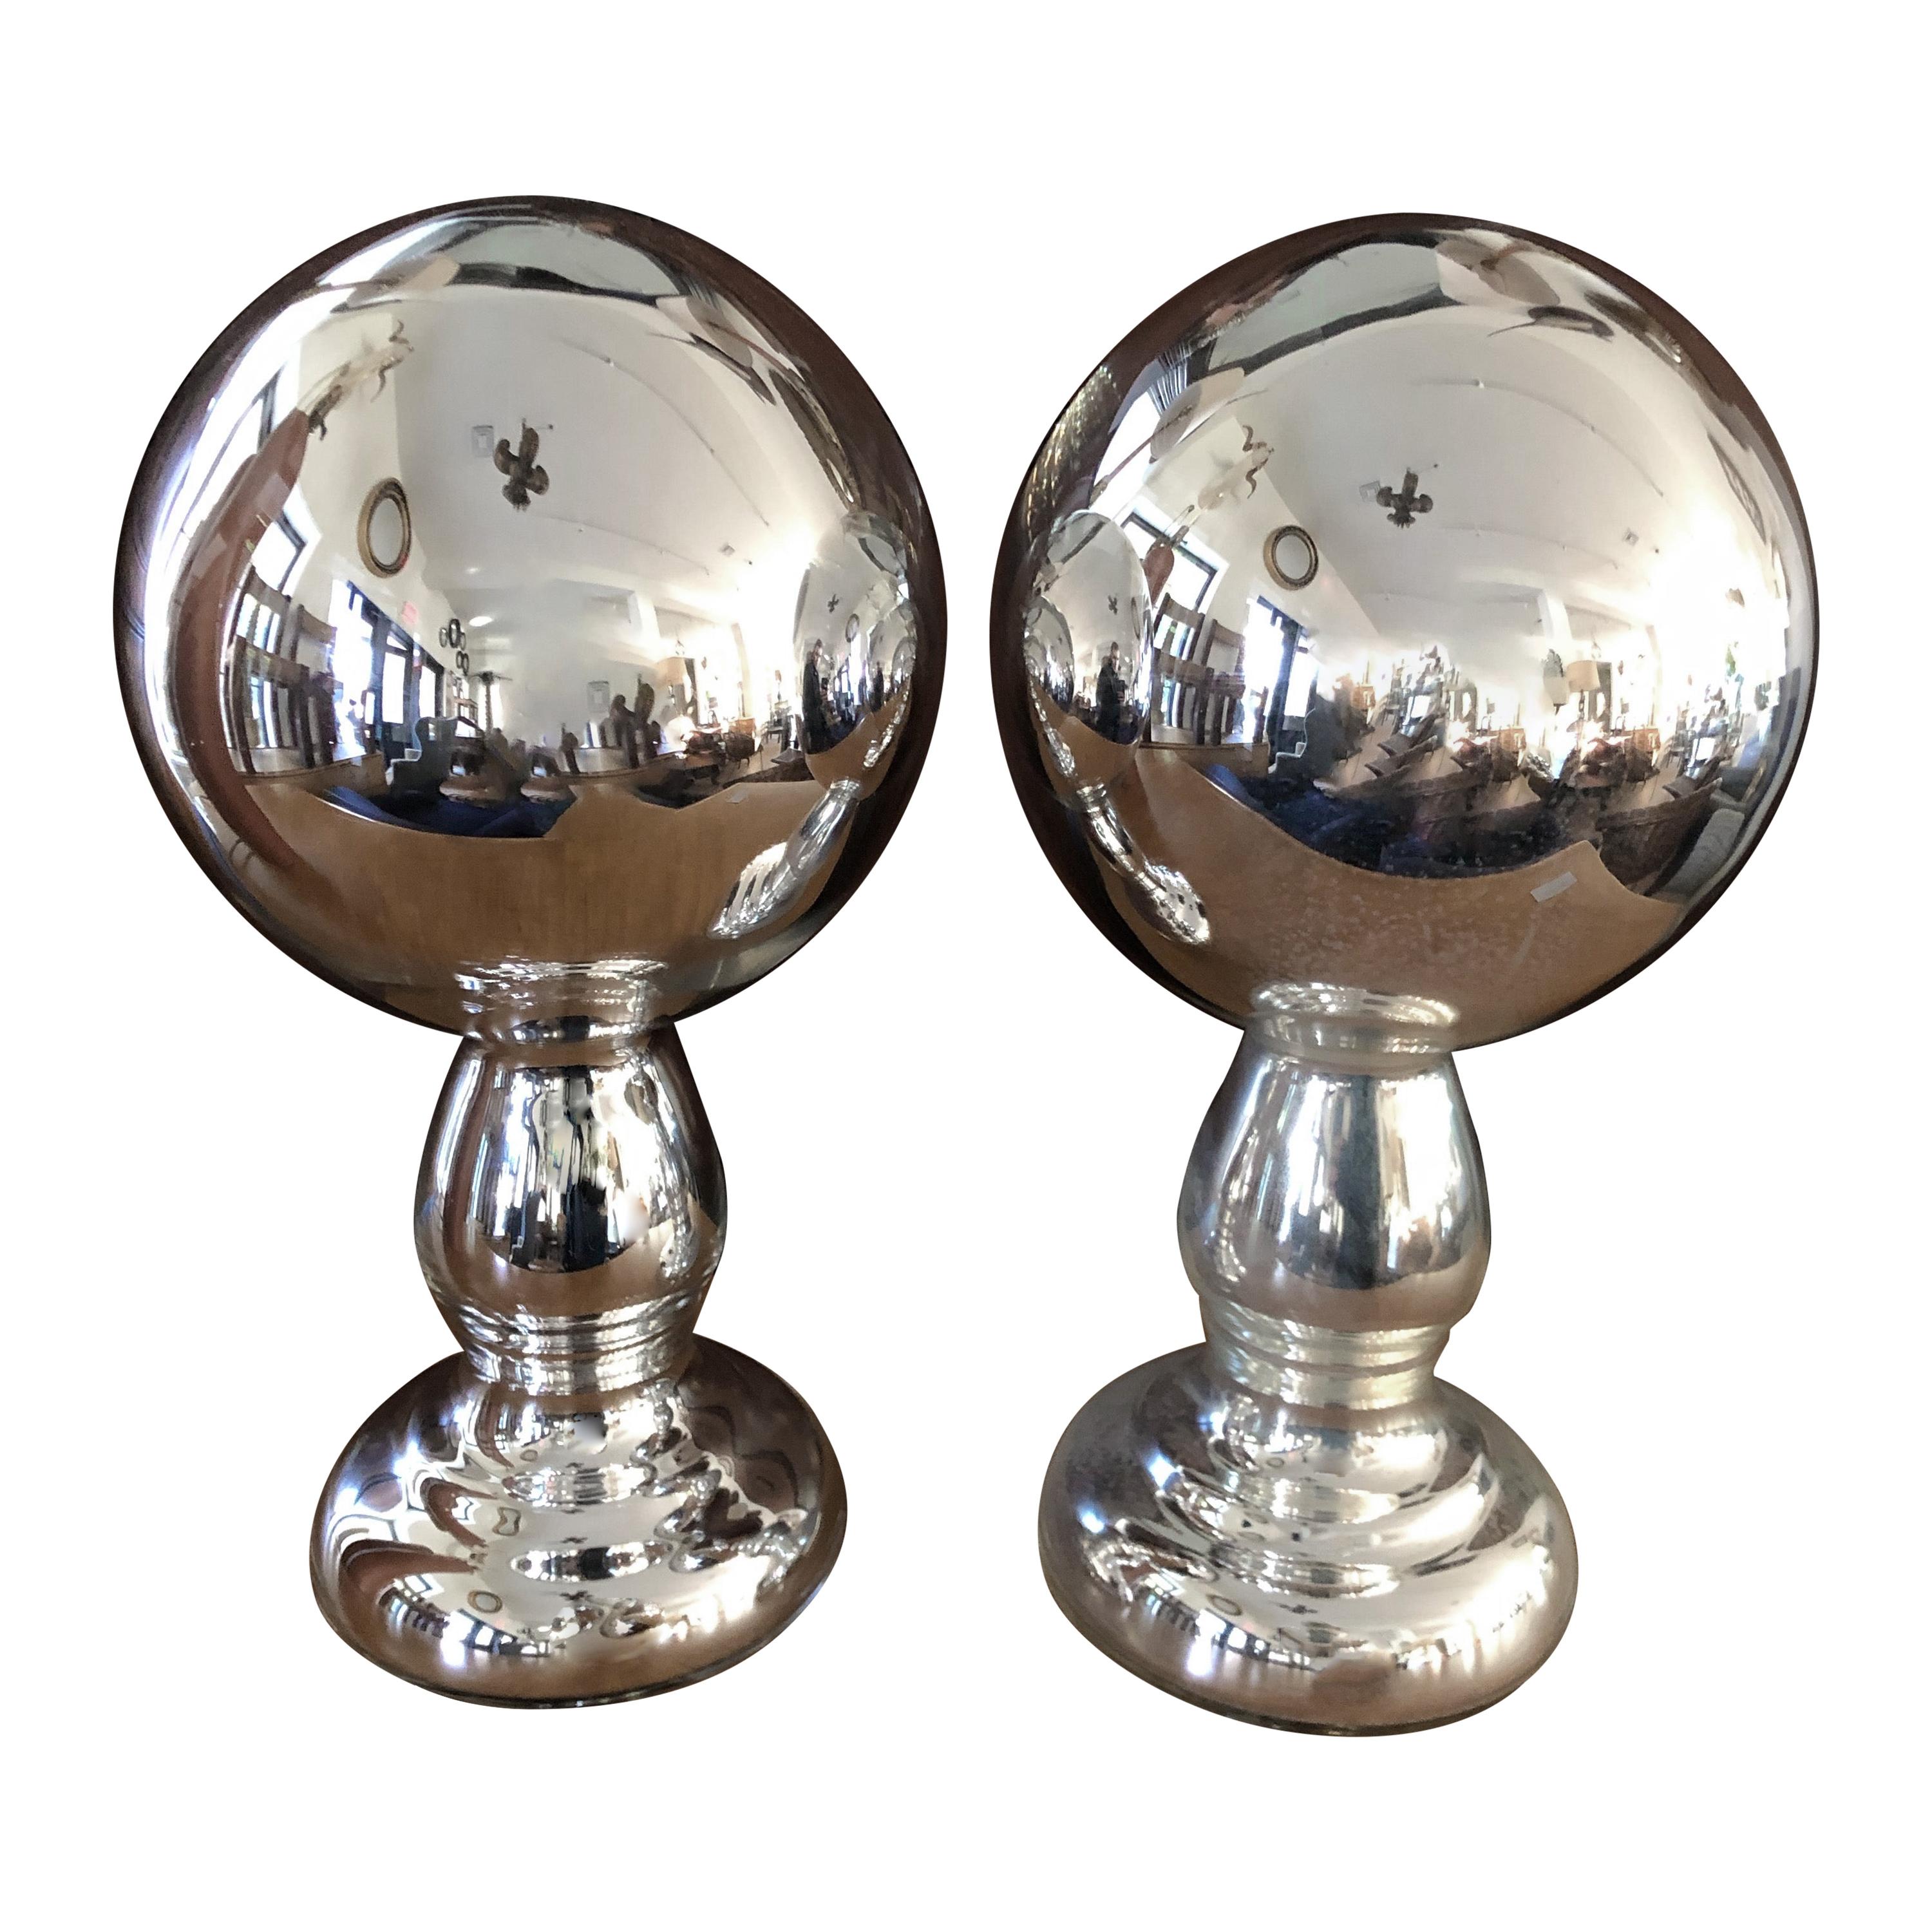 Pair of Mercury Glass Wig Stands